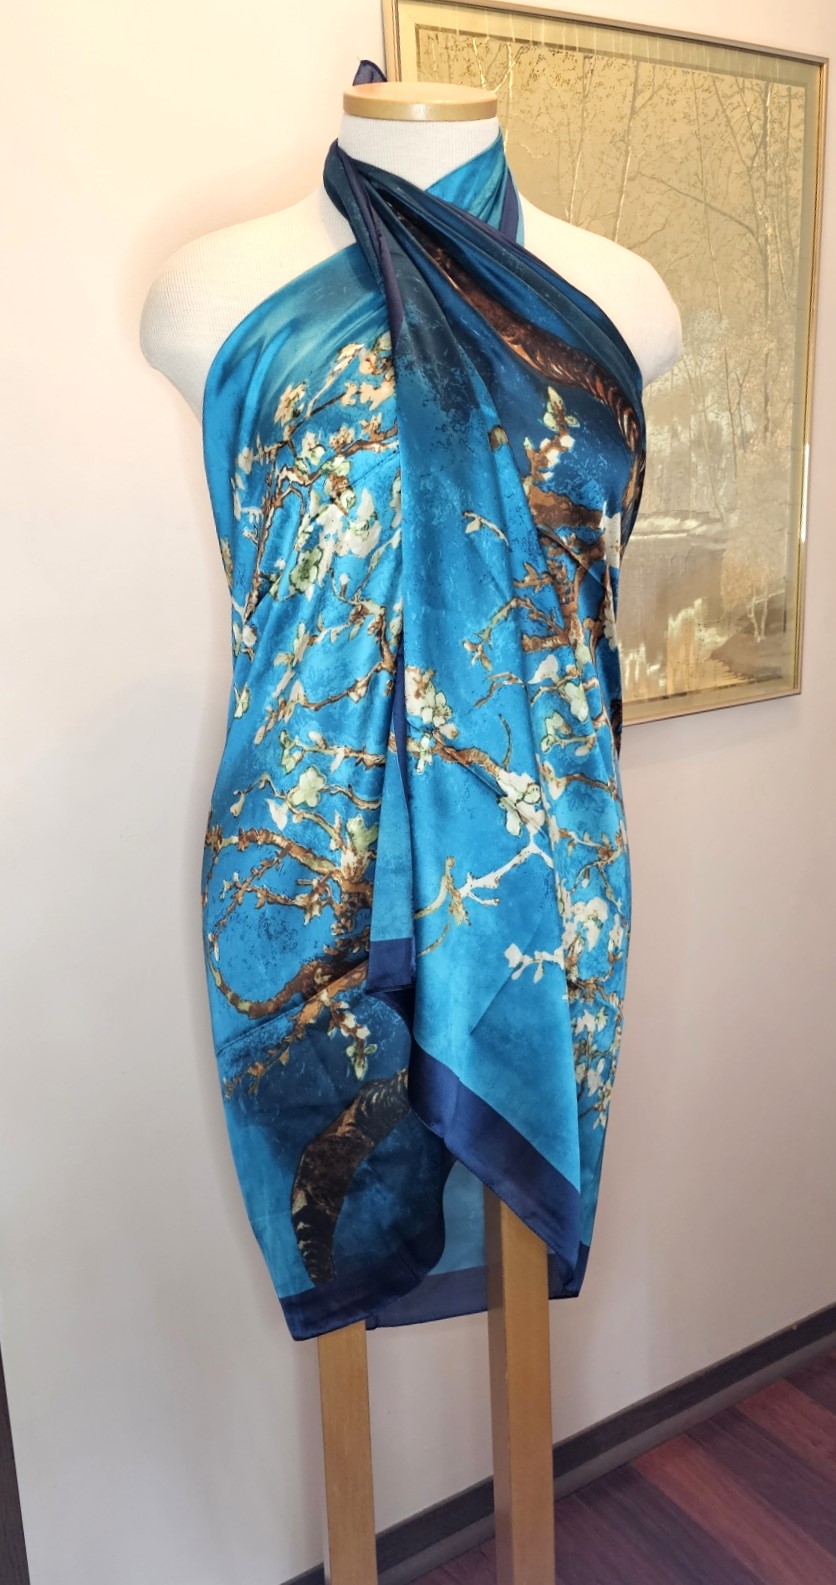 This Modern Shawl Wrap / Scarf / Beachwear / Sarong /Cover-up -Teal Cypress Tree- Silk - 35" x 72" is made with love by The Creative Soul Sisters! Shop more unique gift ideas today with Spots Initiatives, the best way to support creators.